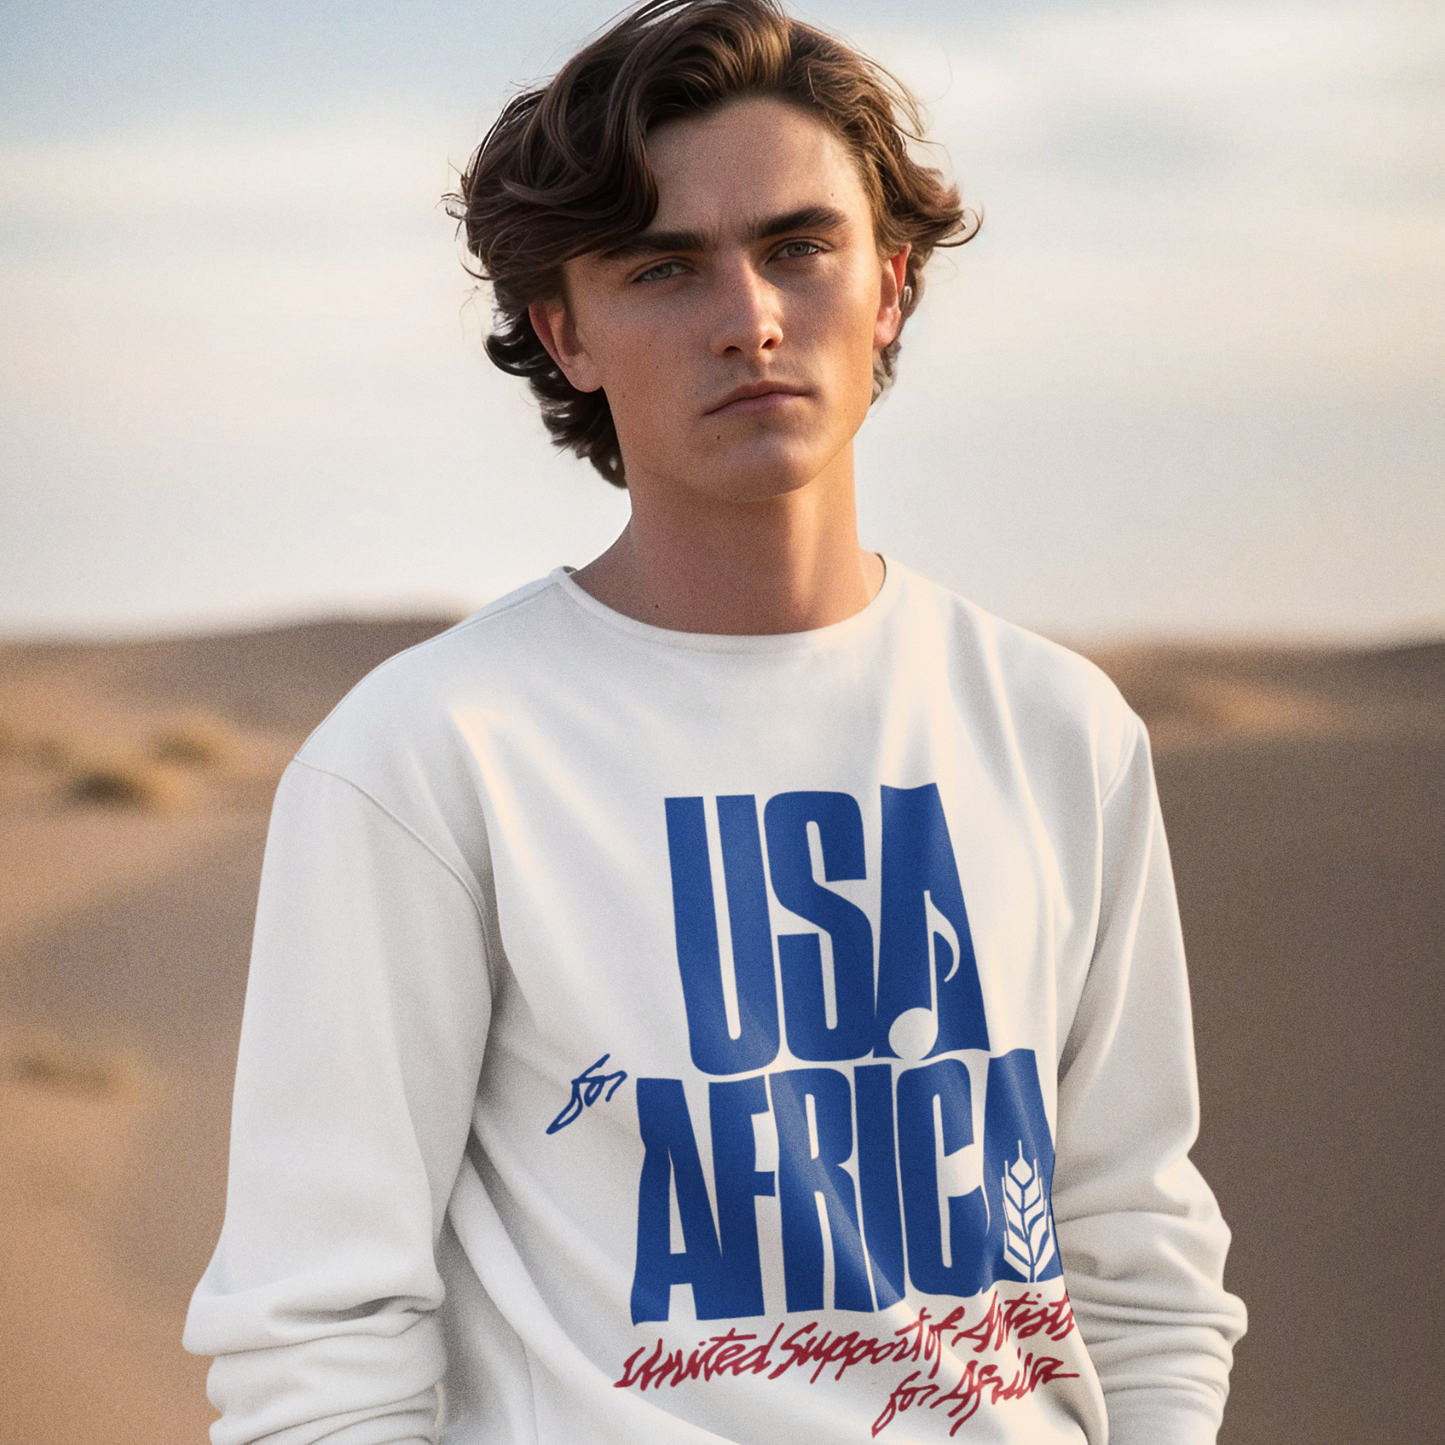 USA For Africa Jumper! Remake of iconic 80s Jumper, worn by 80s Iconic Stars - "We Are The World" Sweatshirt   